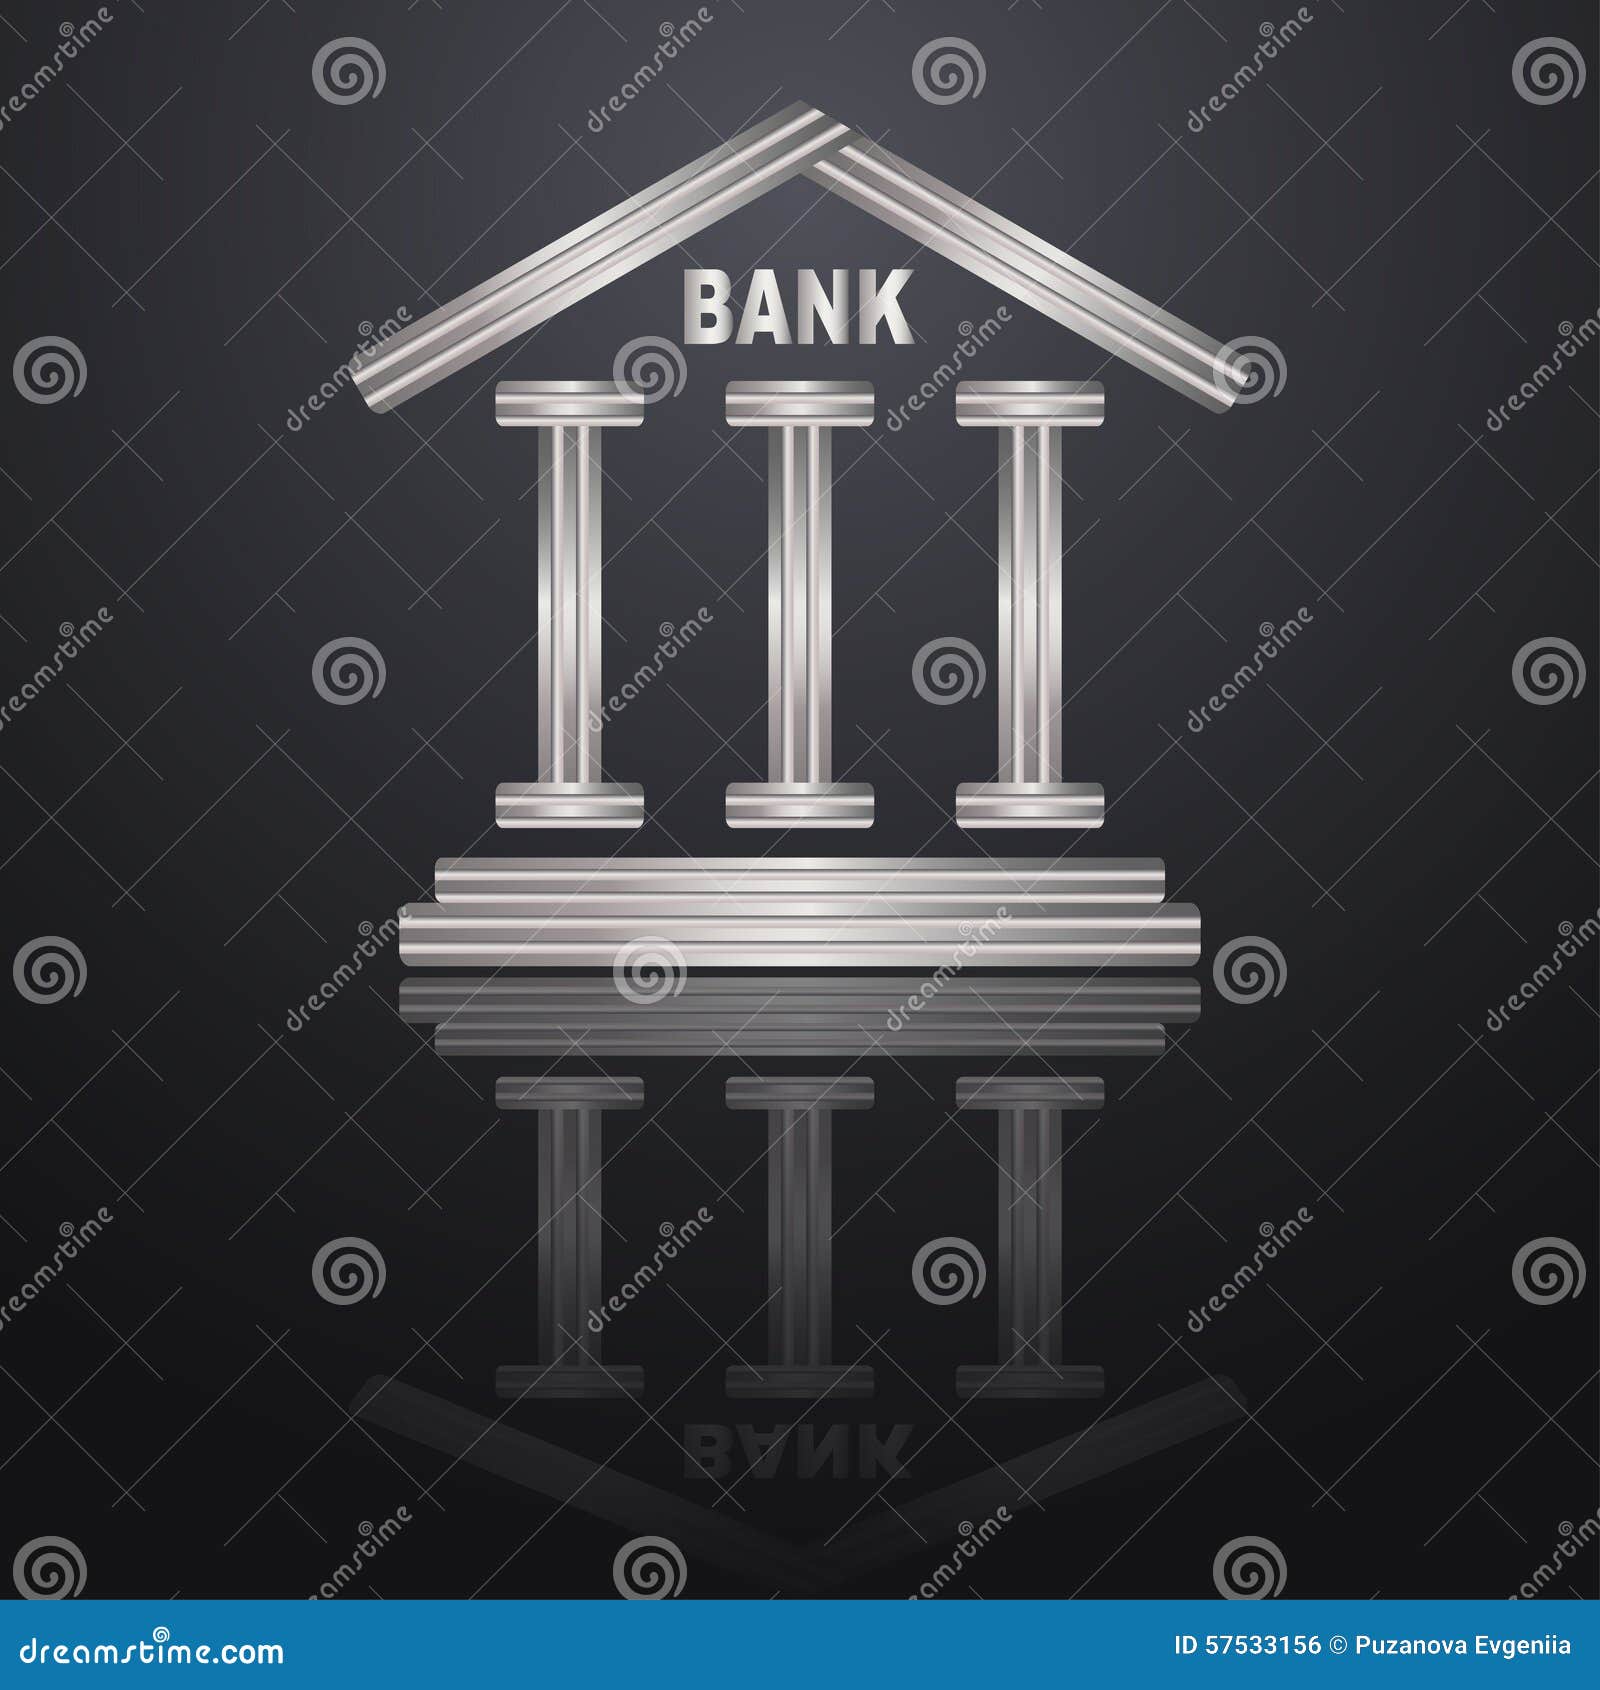 Bank stock vector. Illustration of icon, banking, cash - 57533156